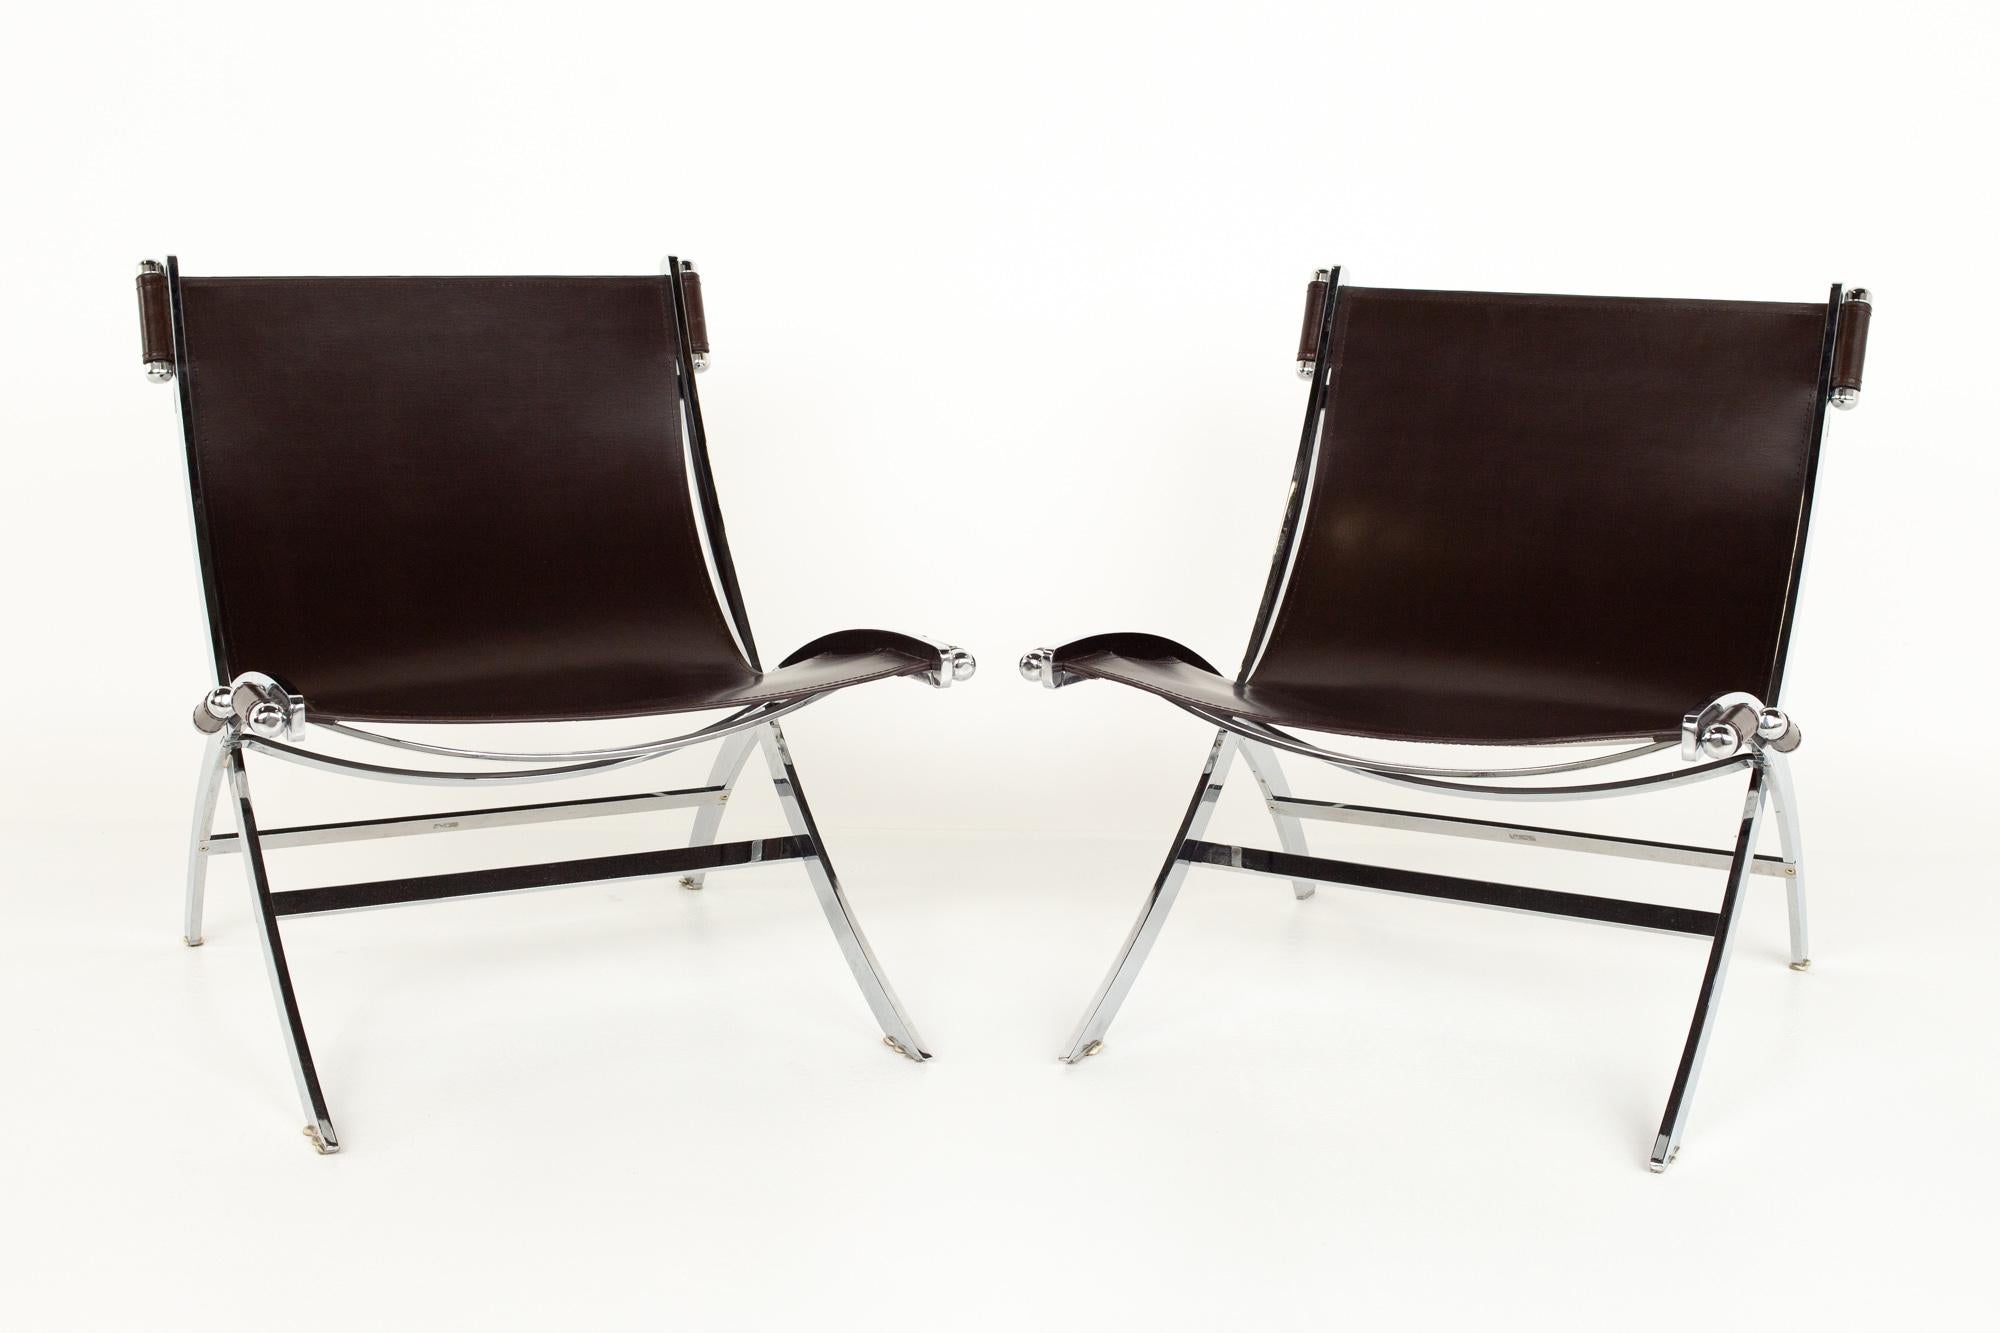 Paul Tuttle for Flexformstyle mid century brown leather and chrome lounge chairs - a pair

Each chair measures: 26 wide x 28 deep x 28.5 high, with a seat height of 14 inches

?All pieces of furniture can be had in what we call restored vintage